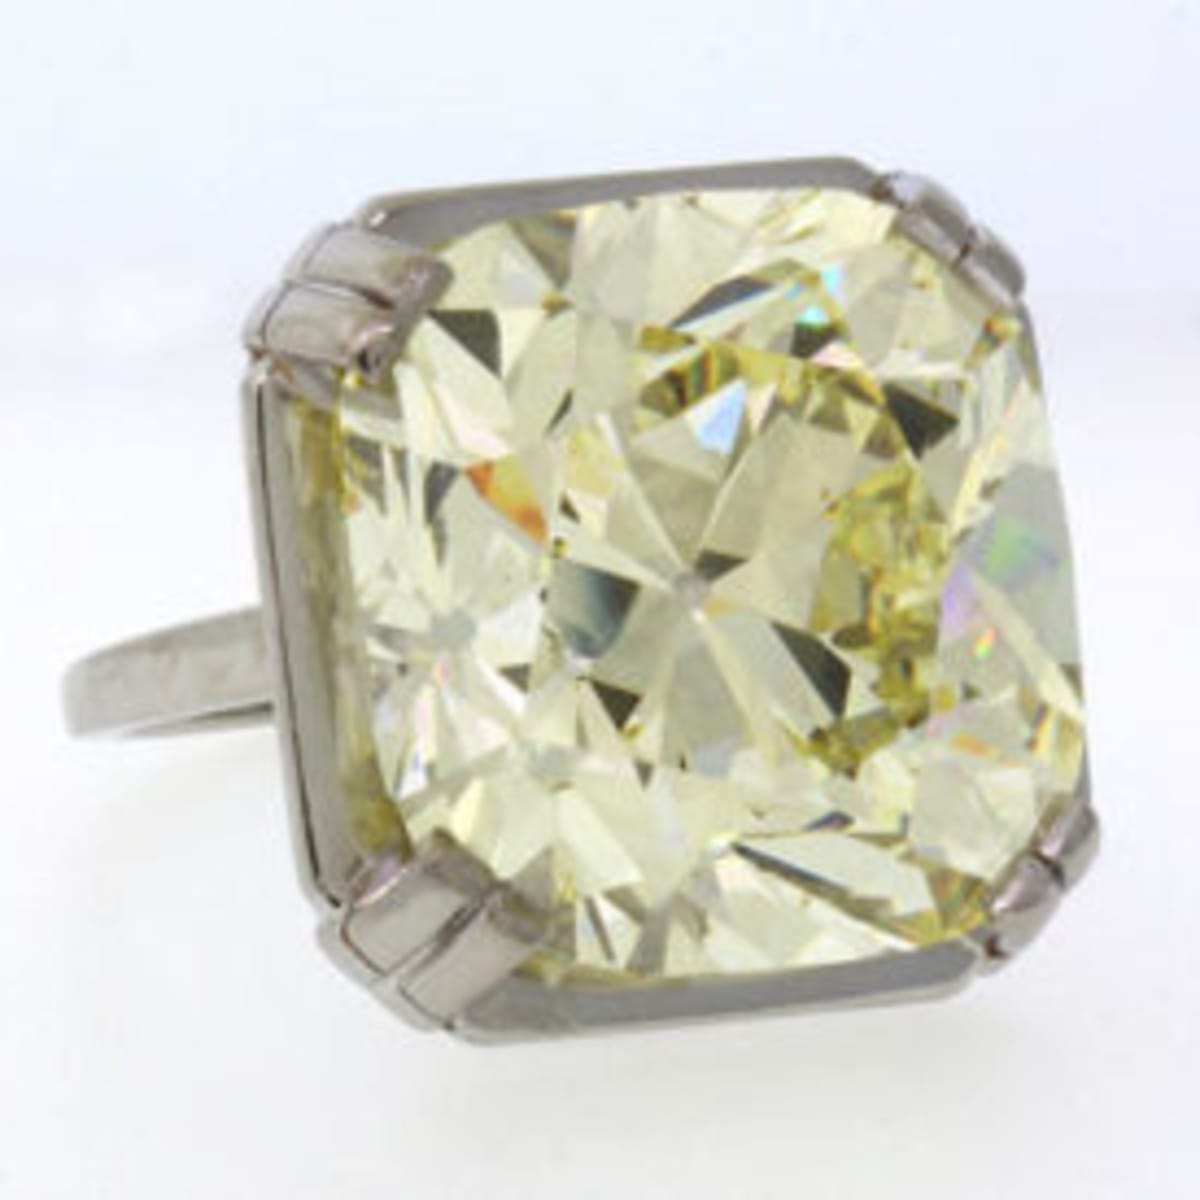 yellow diamond ring may sell for $600K 